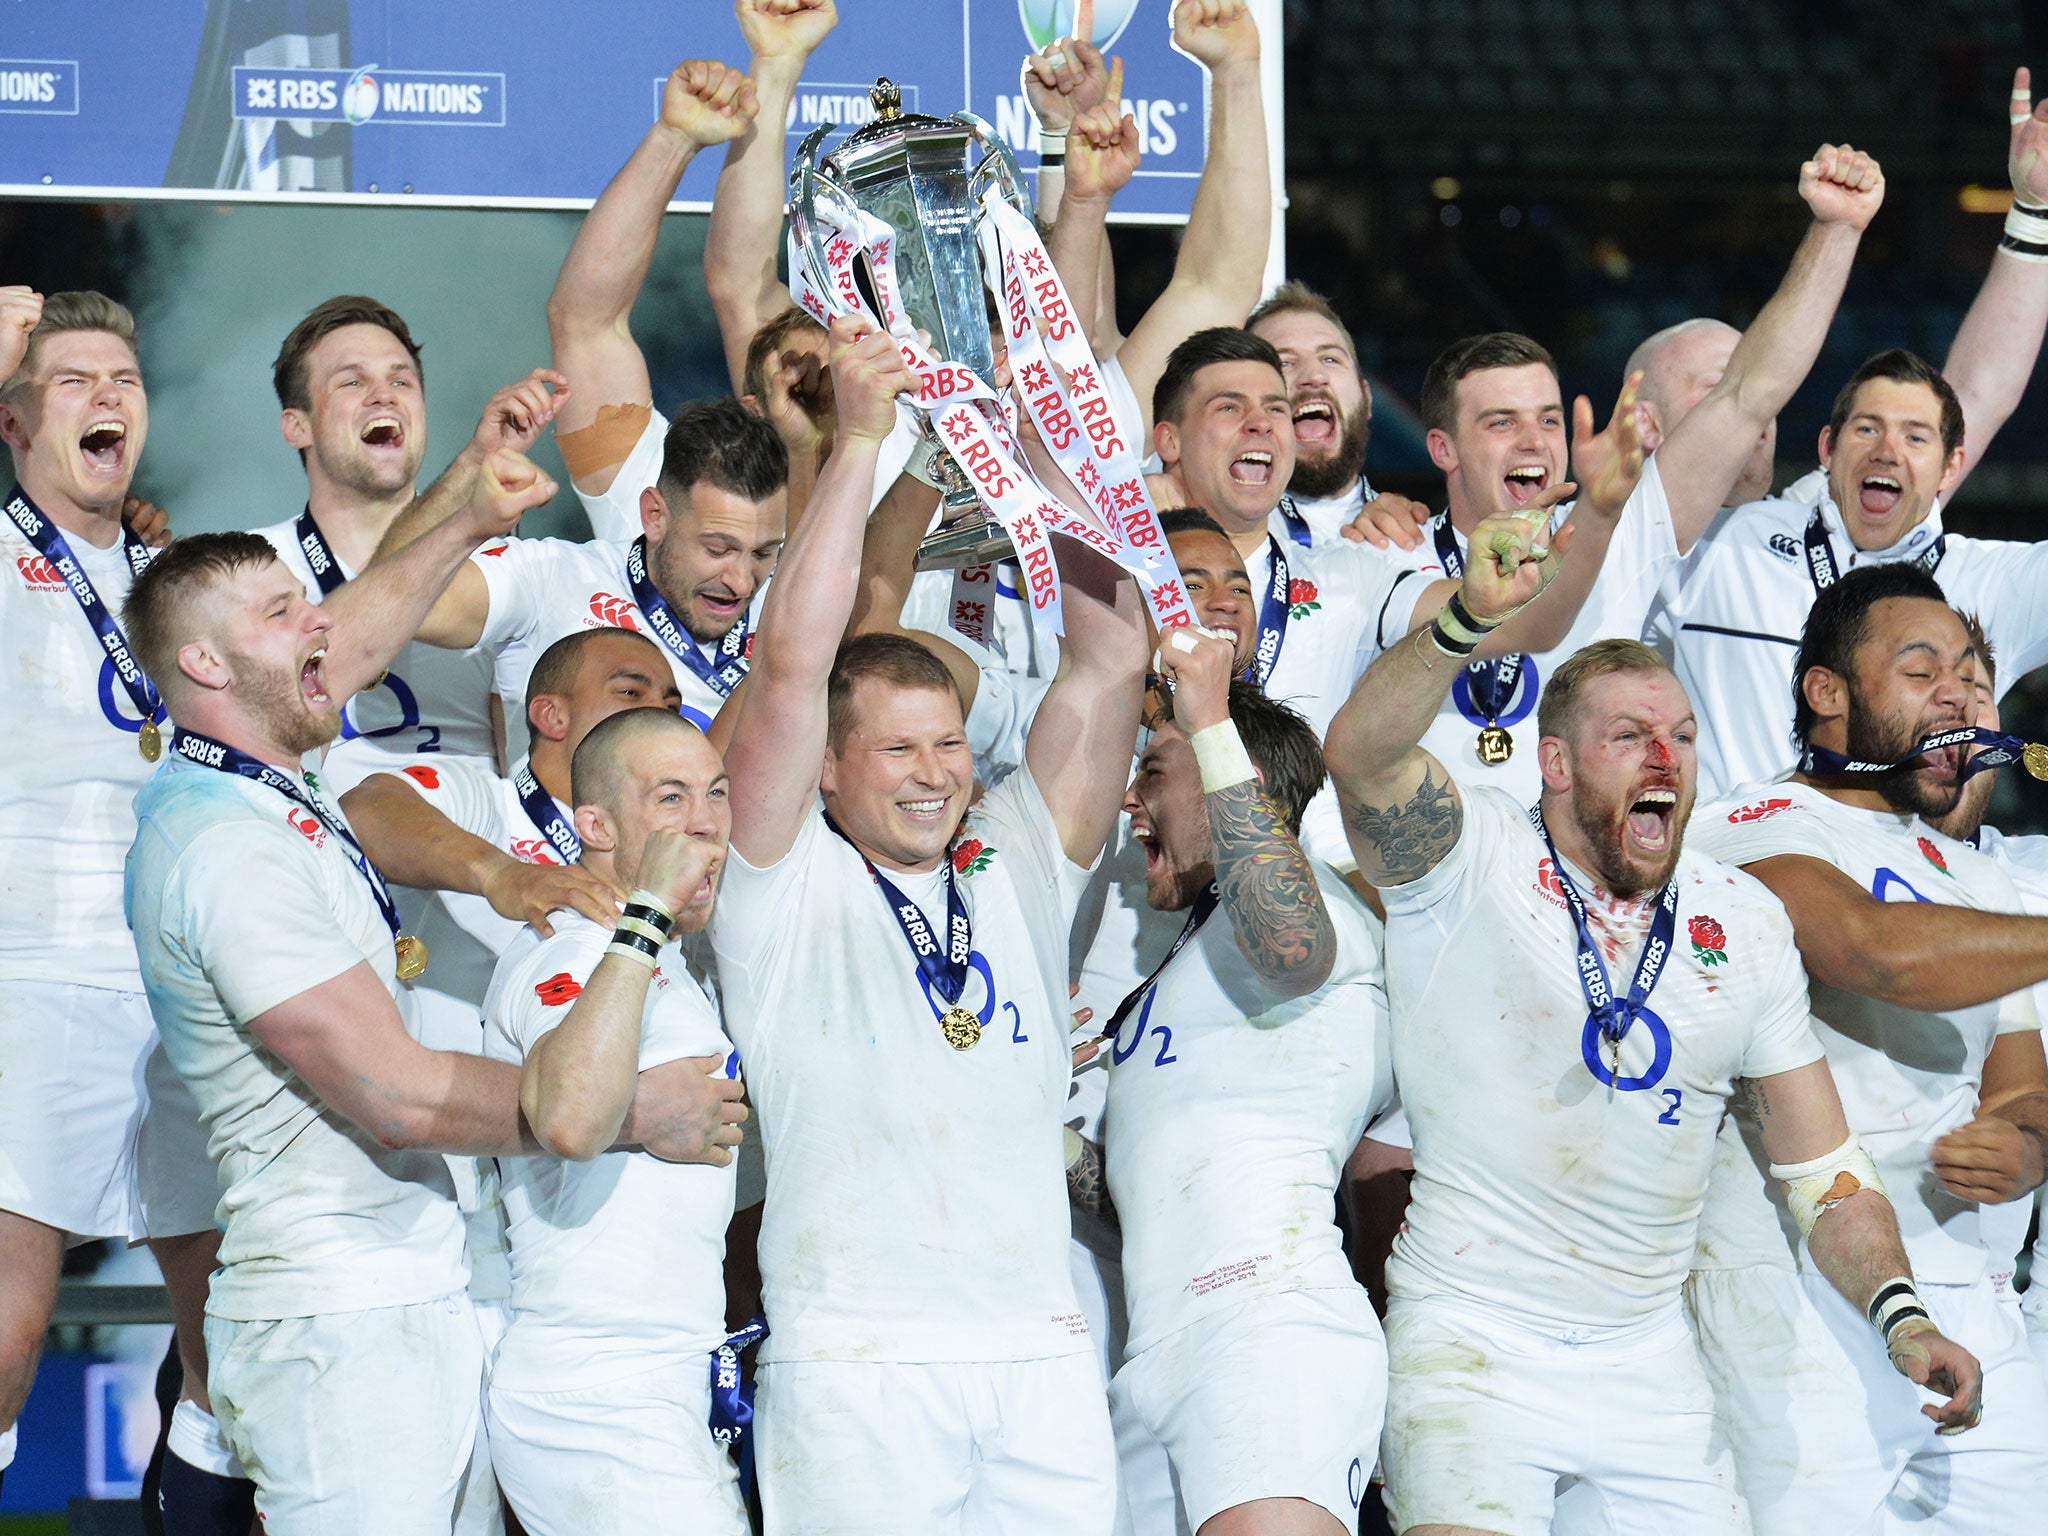 Will England be able to defend their 2016 Six Nations title?